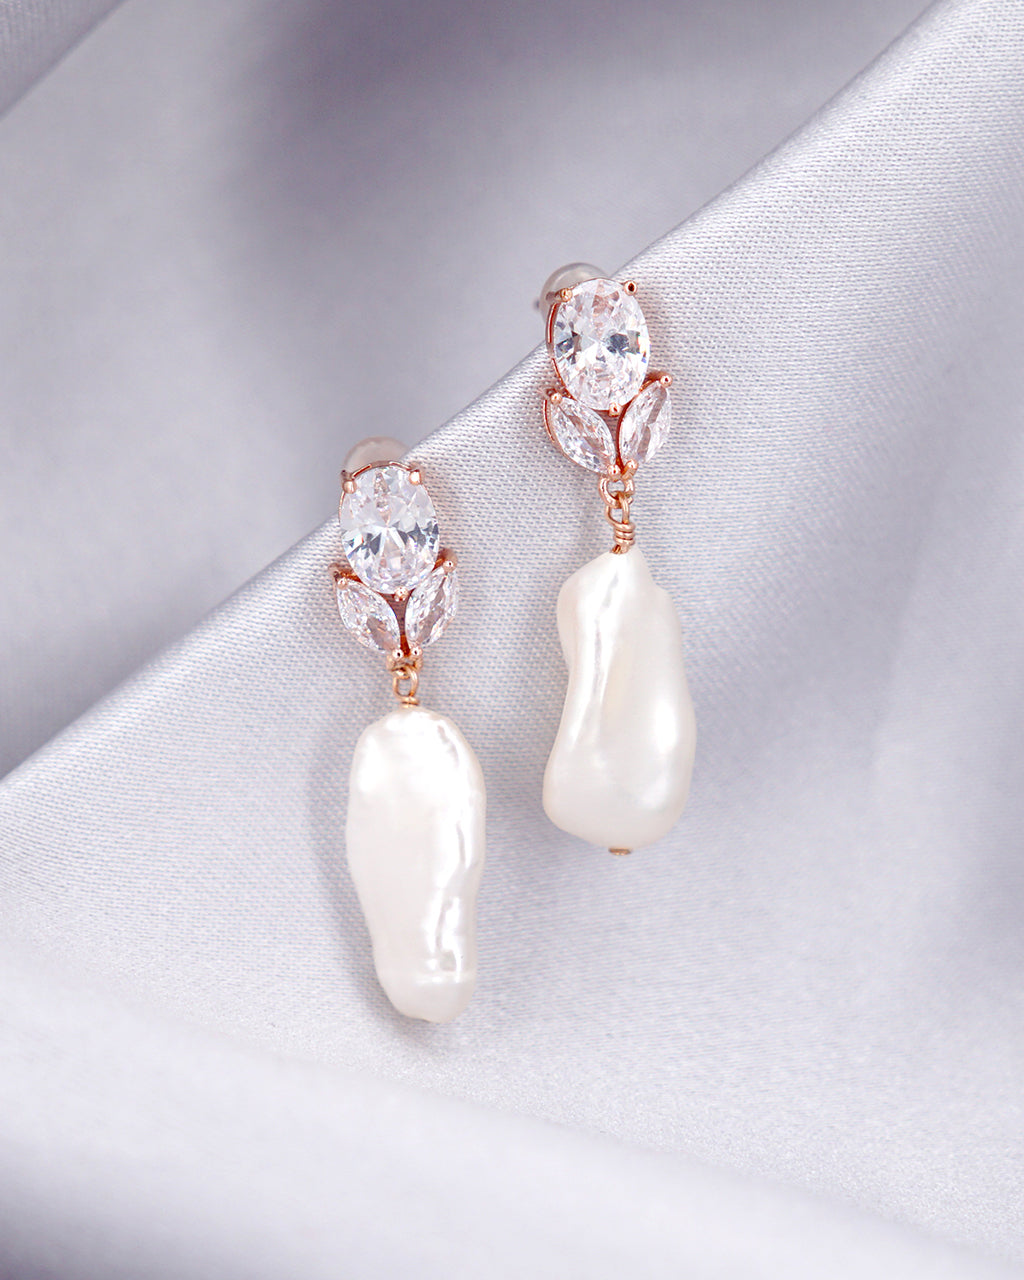 Oval Floral Earrings with Keshi Pearls - Wedding Bridal Jewelry for Brides and Bridesmaids | Singapore